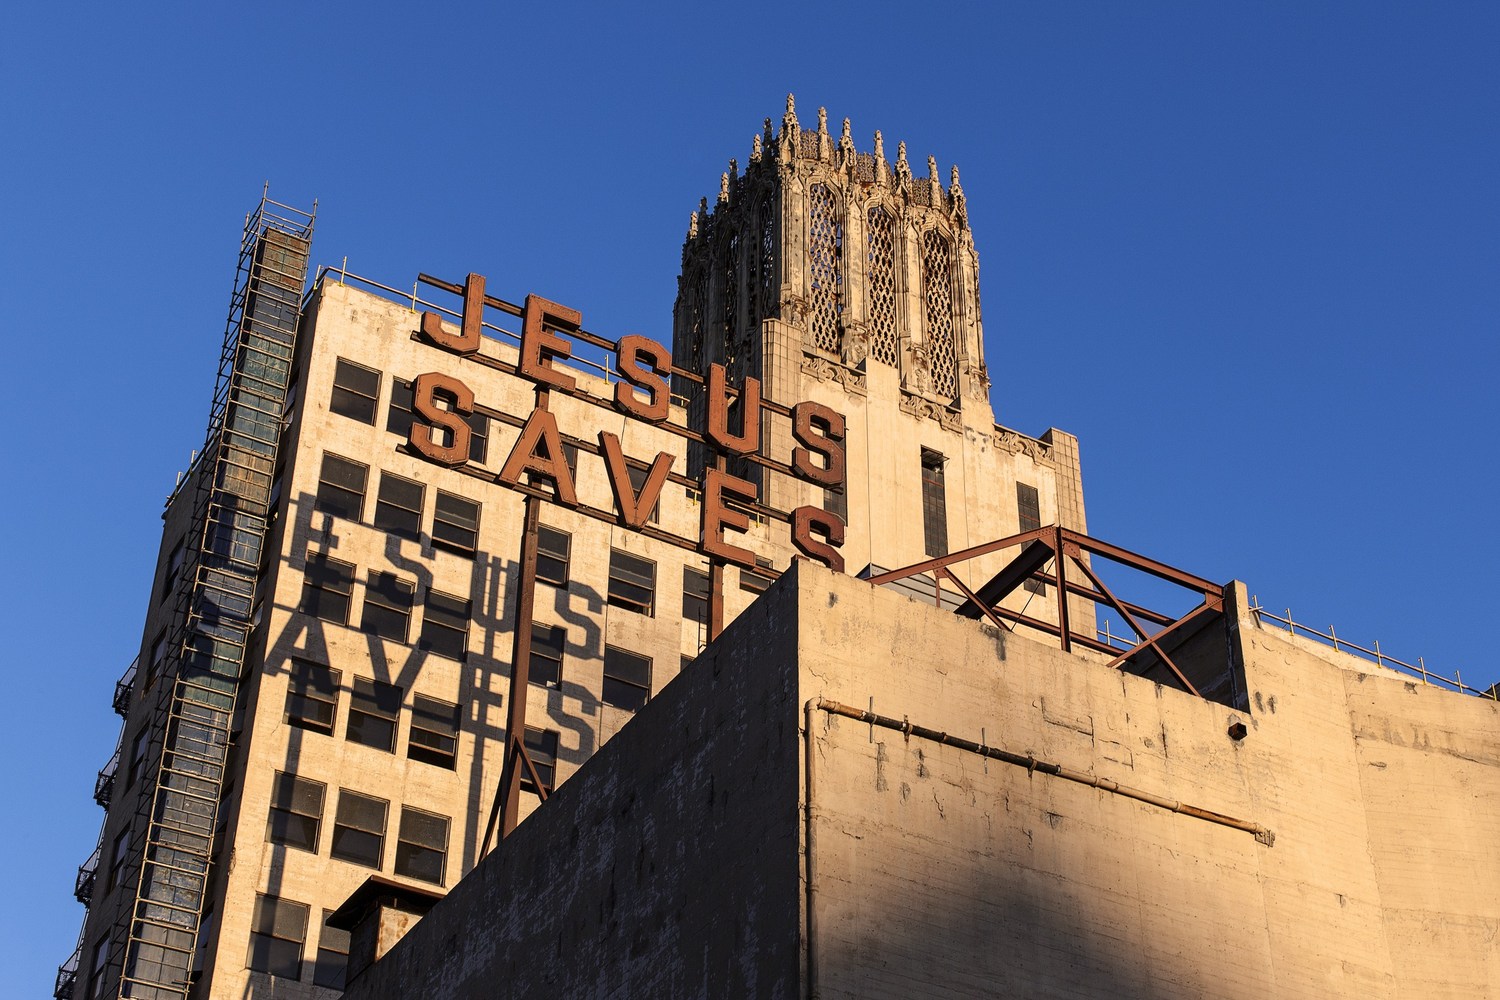 Ace_Hotel_Downtown_LA_-_Exterior_-_Jesus_Saves_-_Photo_by_Spencer_Lowell_(4800x3200)